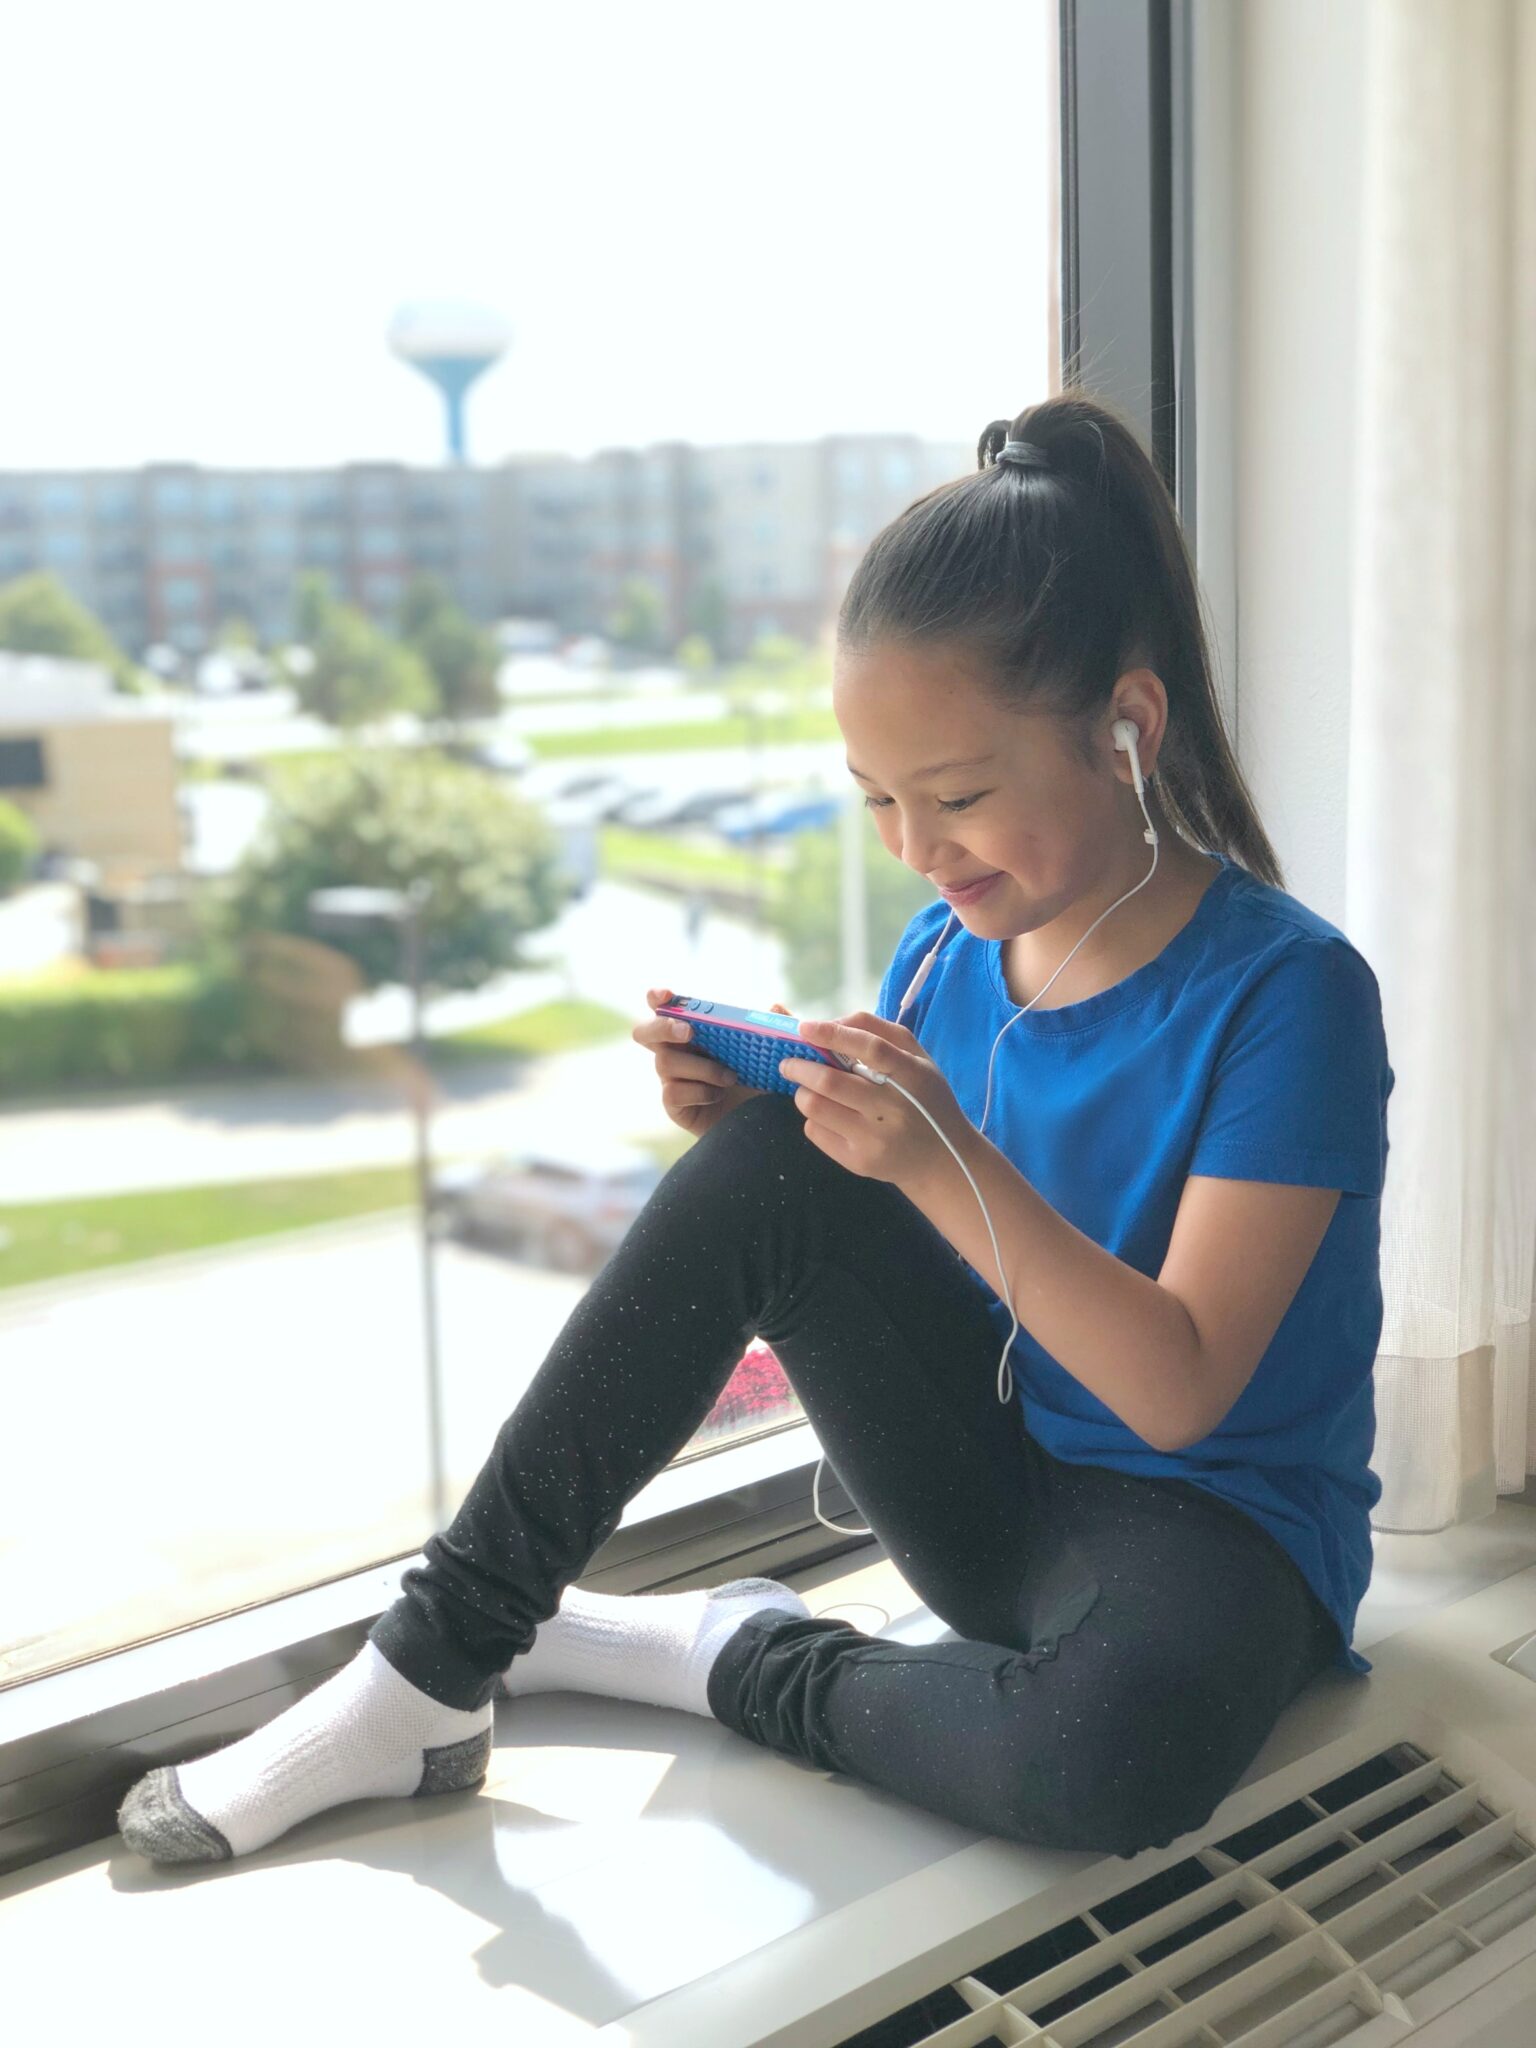 How TELUS Can Help Families Stay Connected